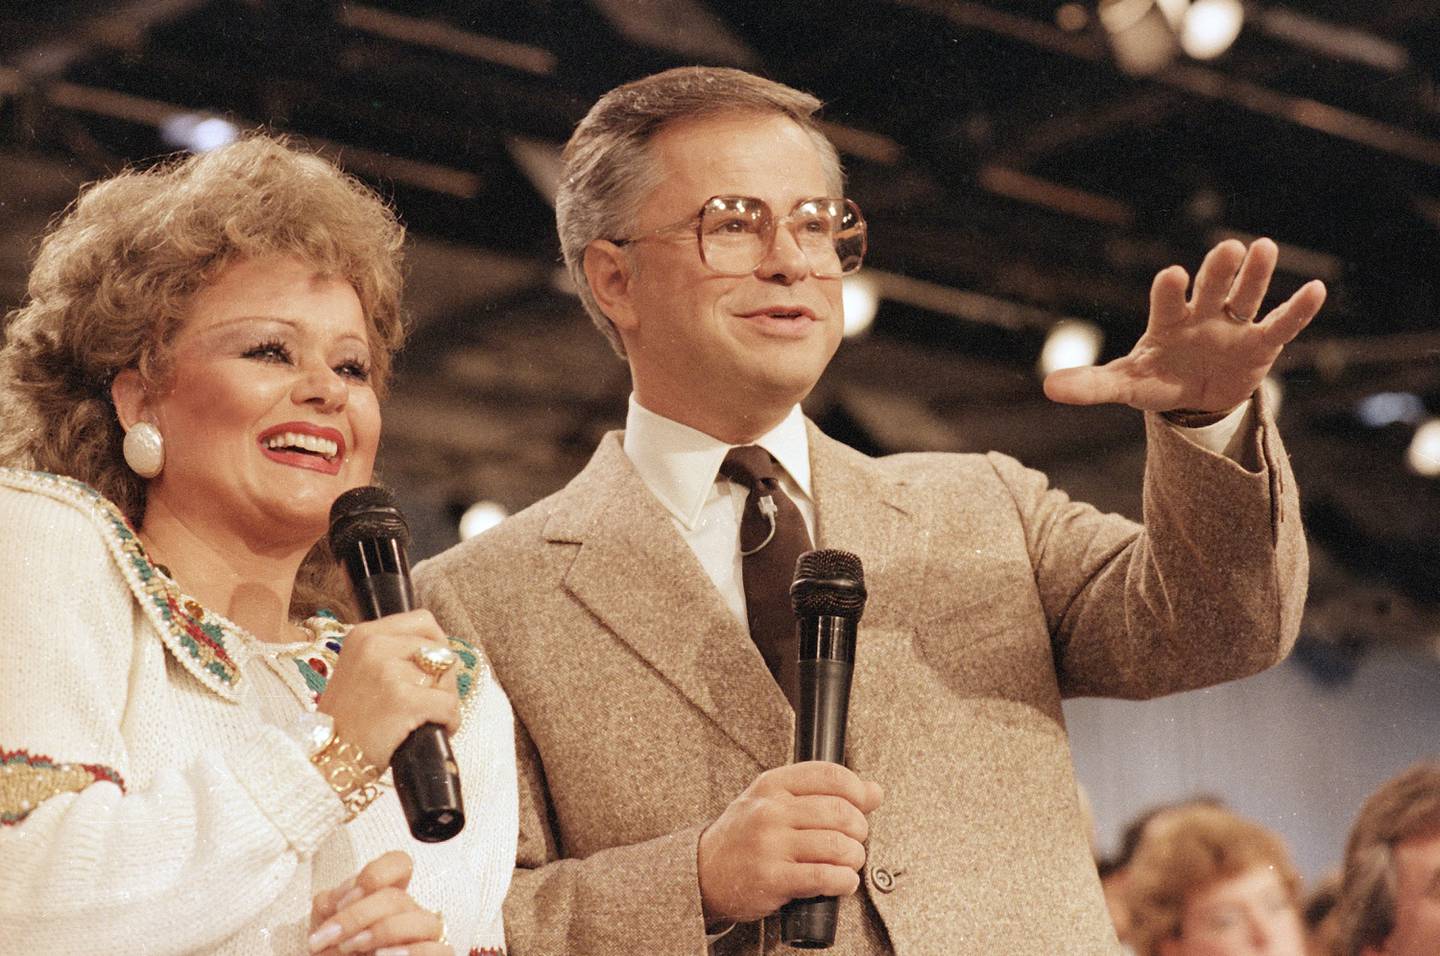 Jim And Tammy Faye Bakker are shown talking to their television audience, Aug. 20, 1986 at their PTL Ministry in Fort Mill, S.C.  (AP Photo/Lou Krasky)